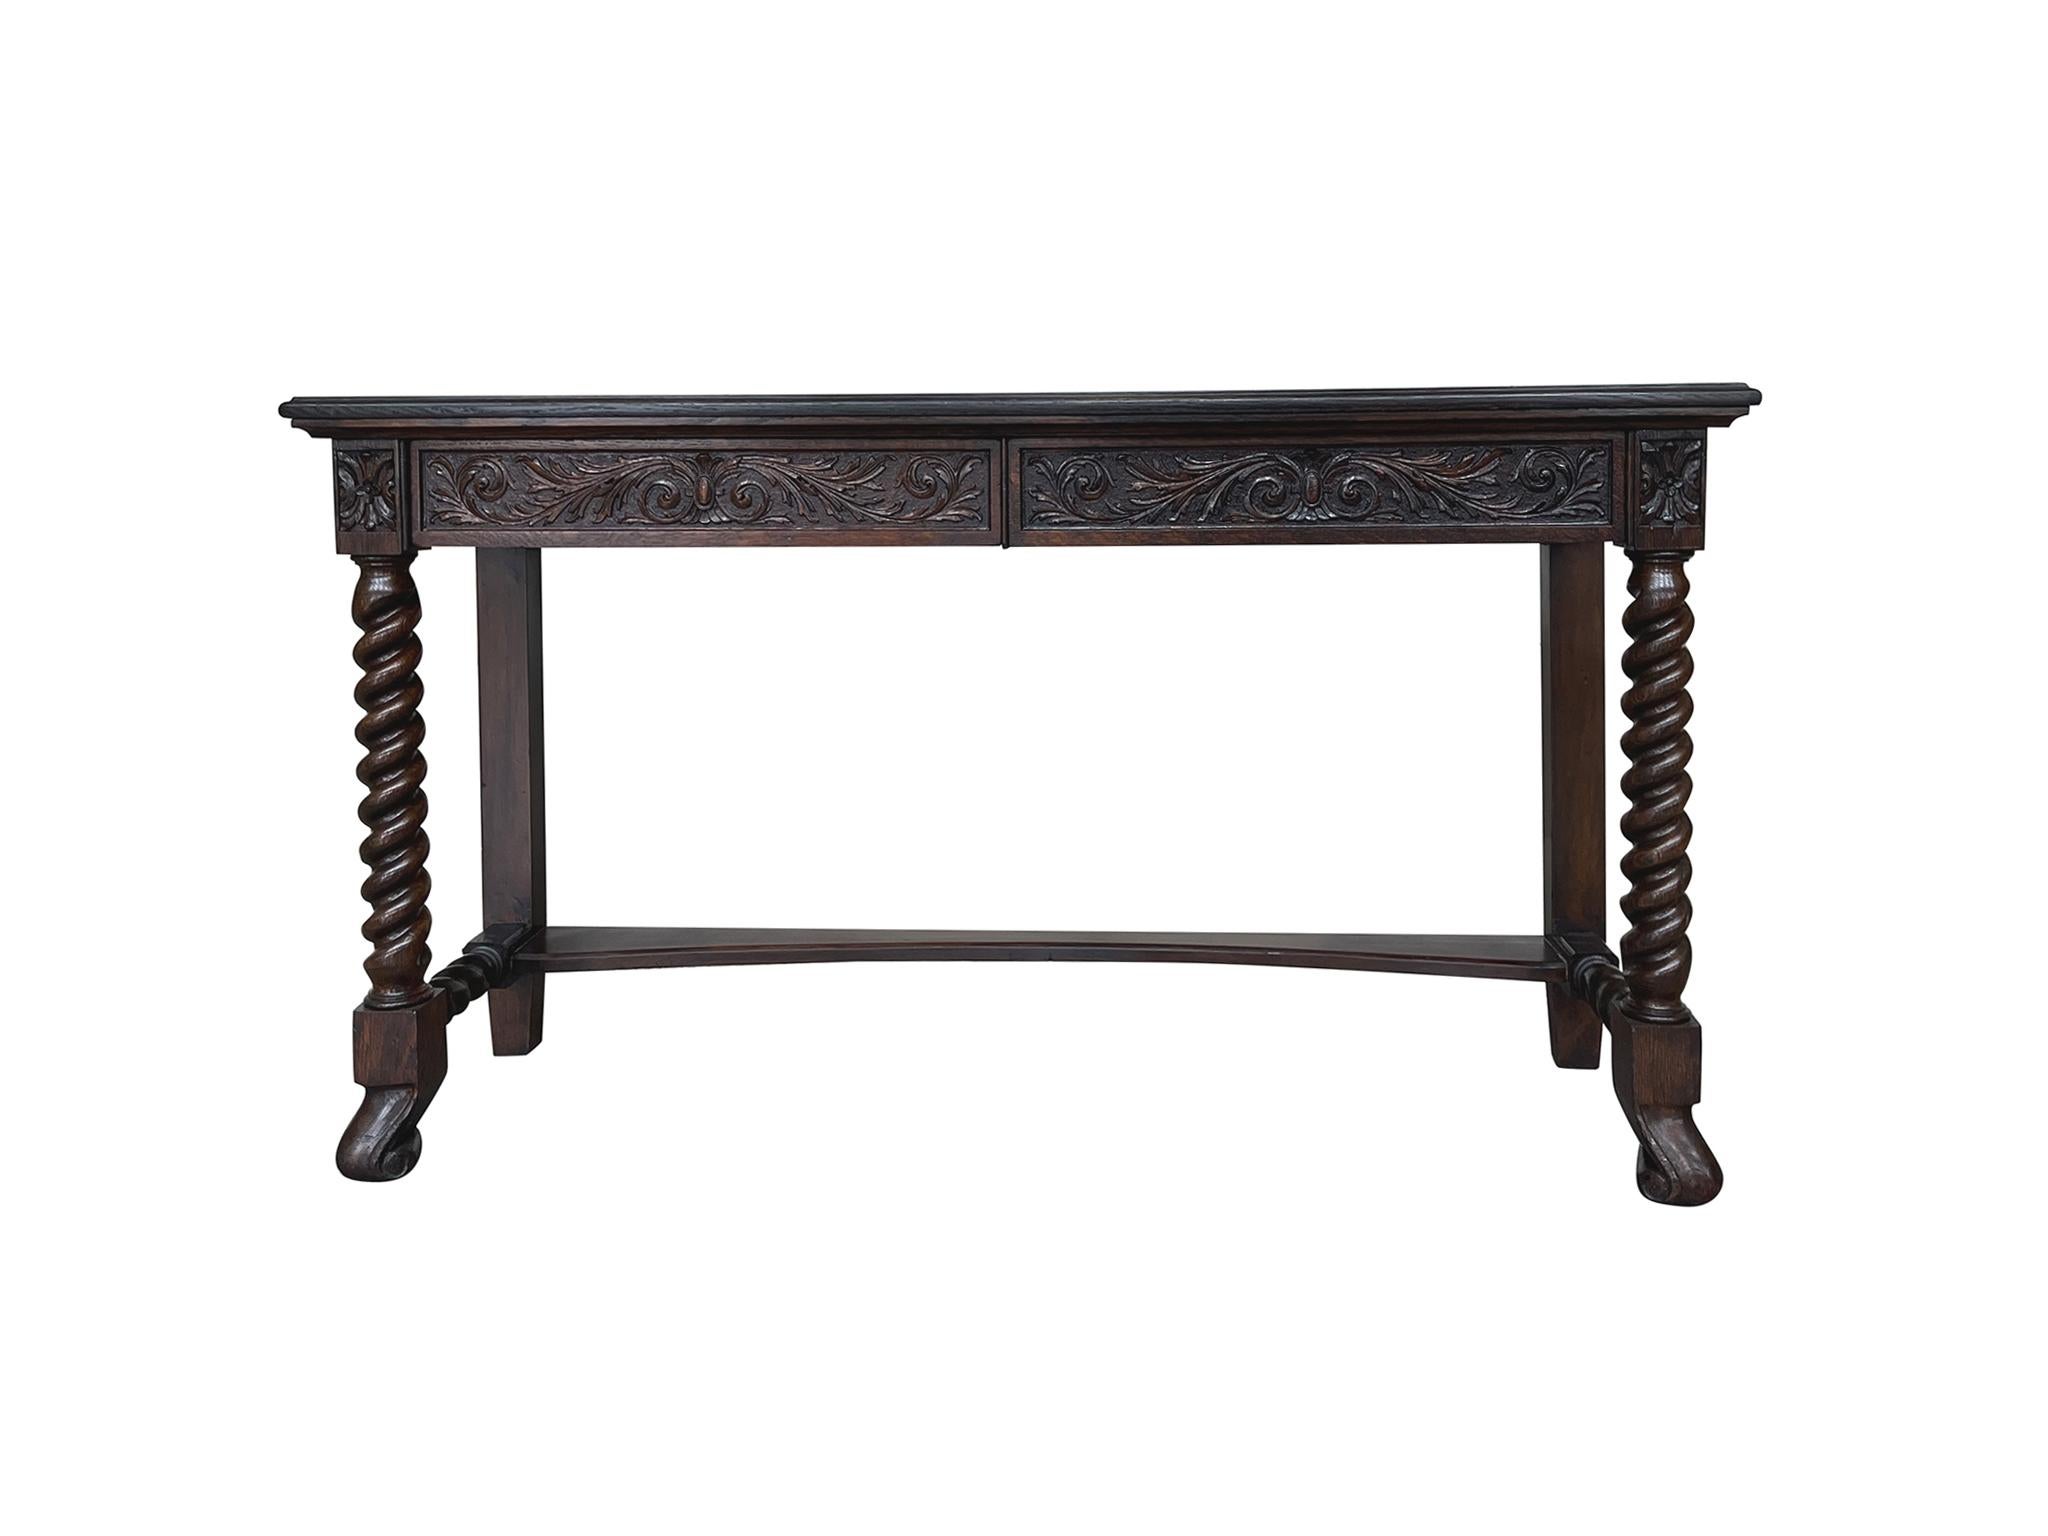 Handcrafted in the 19th Century, this console table consists of warm, red-brown oak wood constructed with a single left drawer. The wood has been beautifully refinished. Hand-carved floral motifs adorn the front and side panels. The front legs are